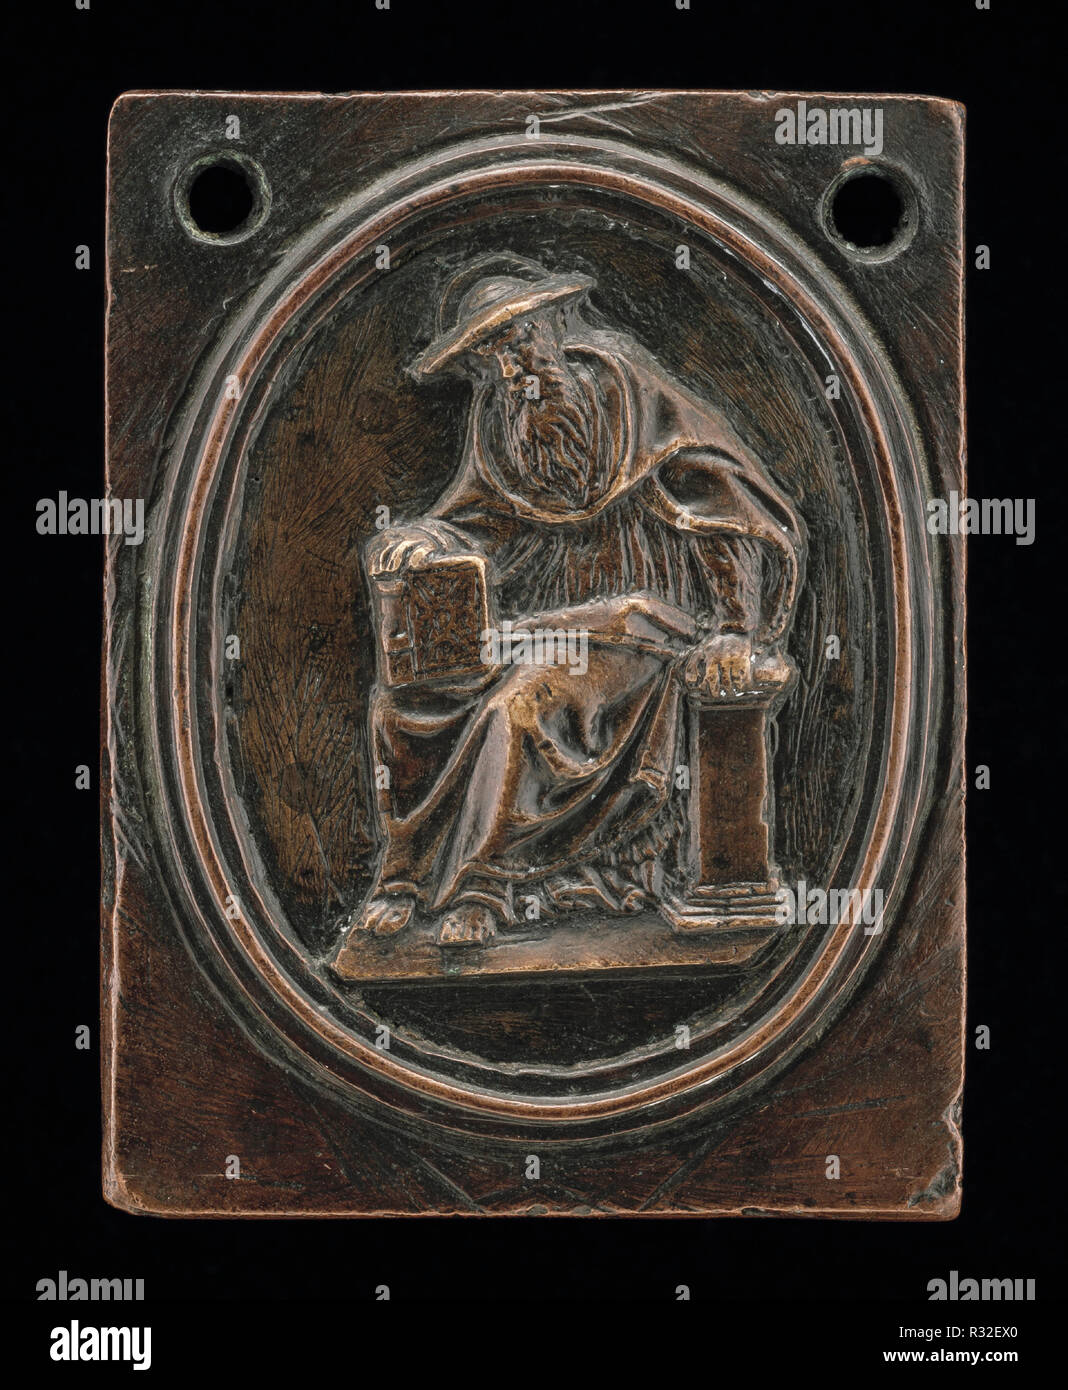 Saint Jerome. Dated: c. 1500. Dimensions: Overall: 6.5 x 5 cm (2 9/16 x 1 15/16 in.)  overall (inner dimensions of oval field): 4.8 x 3.6 cm (1 7/8 x 1 7/16 in.) gross weight: 150 gr. Medium: bronze//Medium brown patina. Museum: National Gallery of Art, Washington DC. Author: North Italian 16th Century. Stock Photo